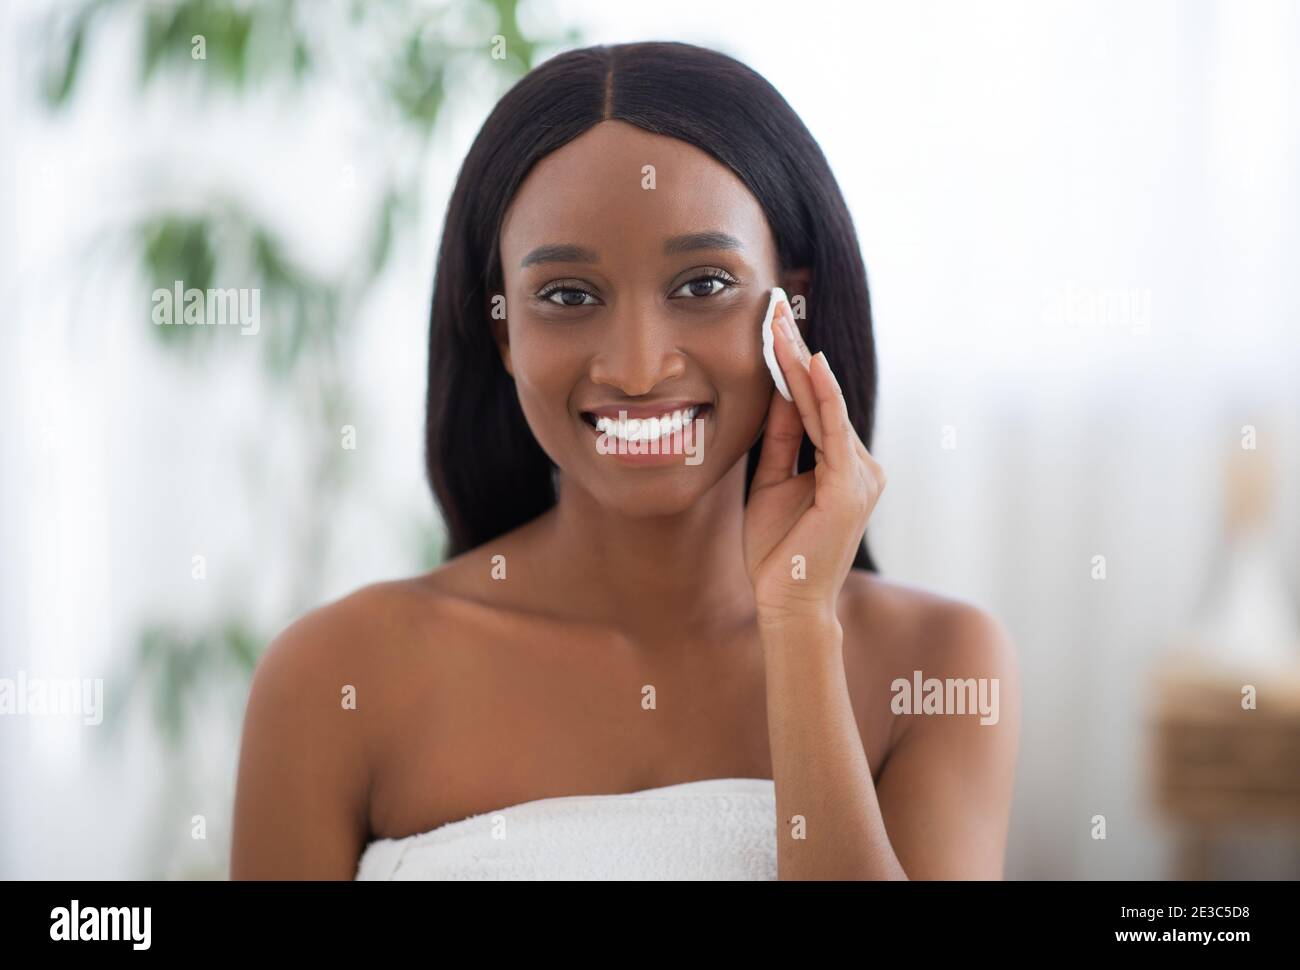 Cleansing face, daily healthy beauty routine, facial skin care Stock Photo